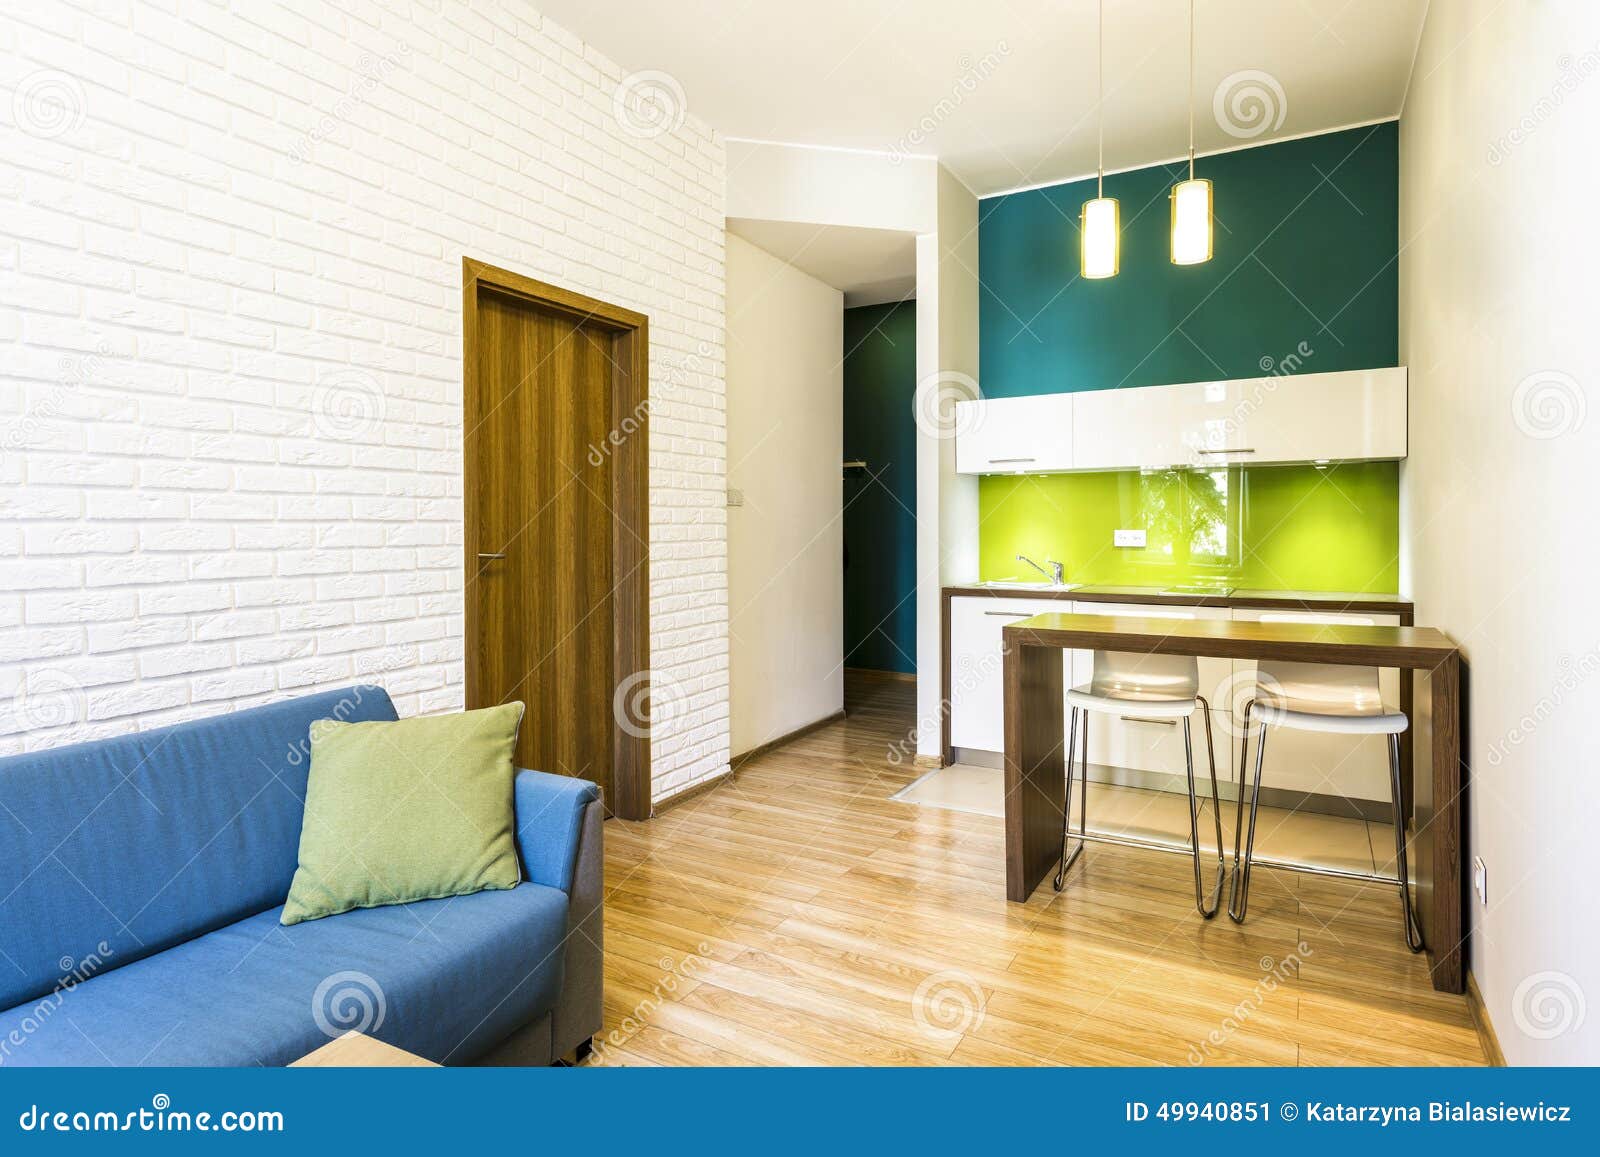 Small living room with green kitchenette. Small living room with brick wall and green kitchenette